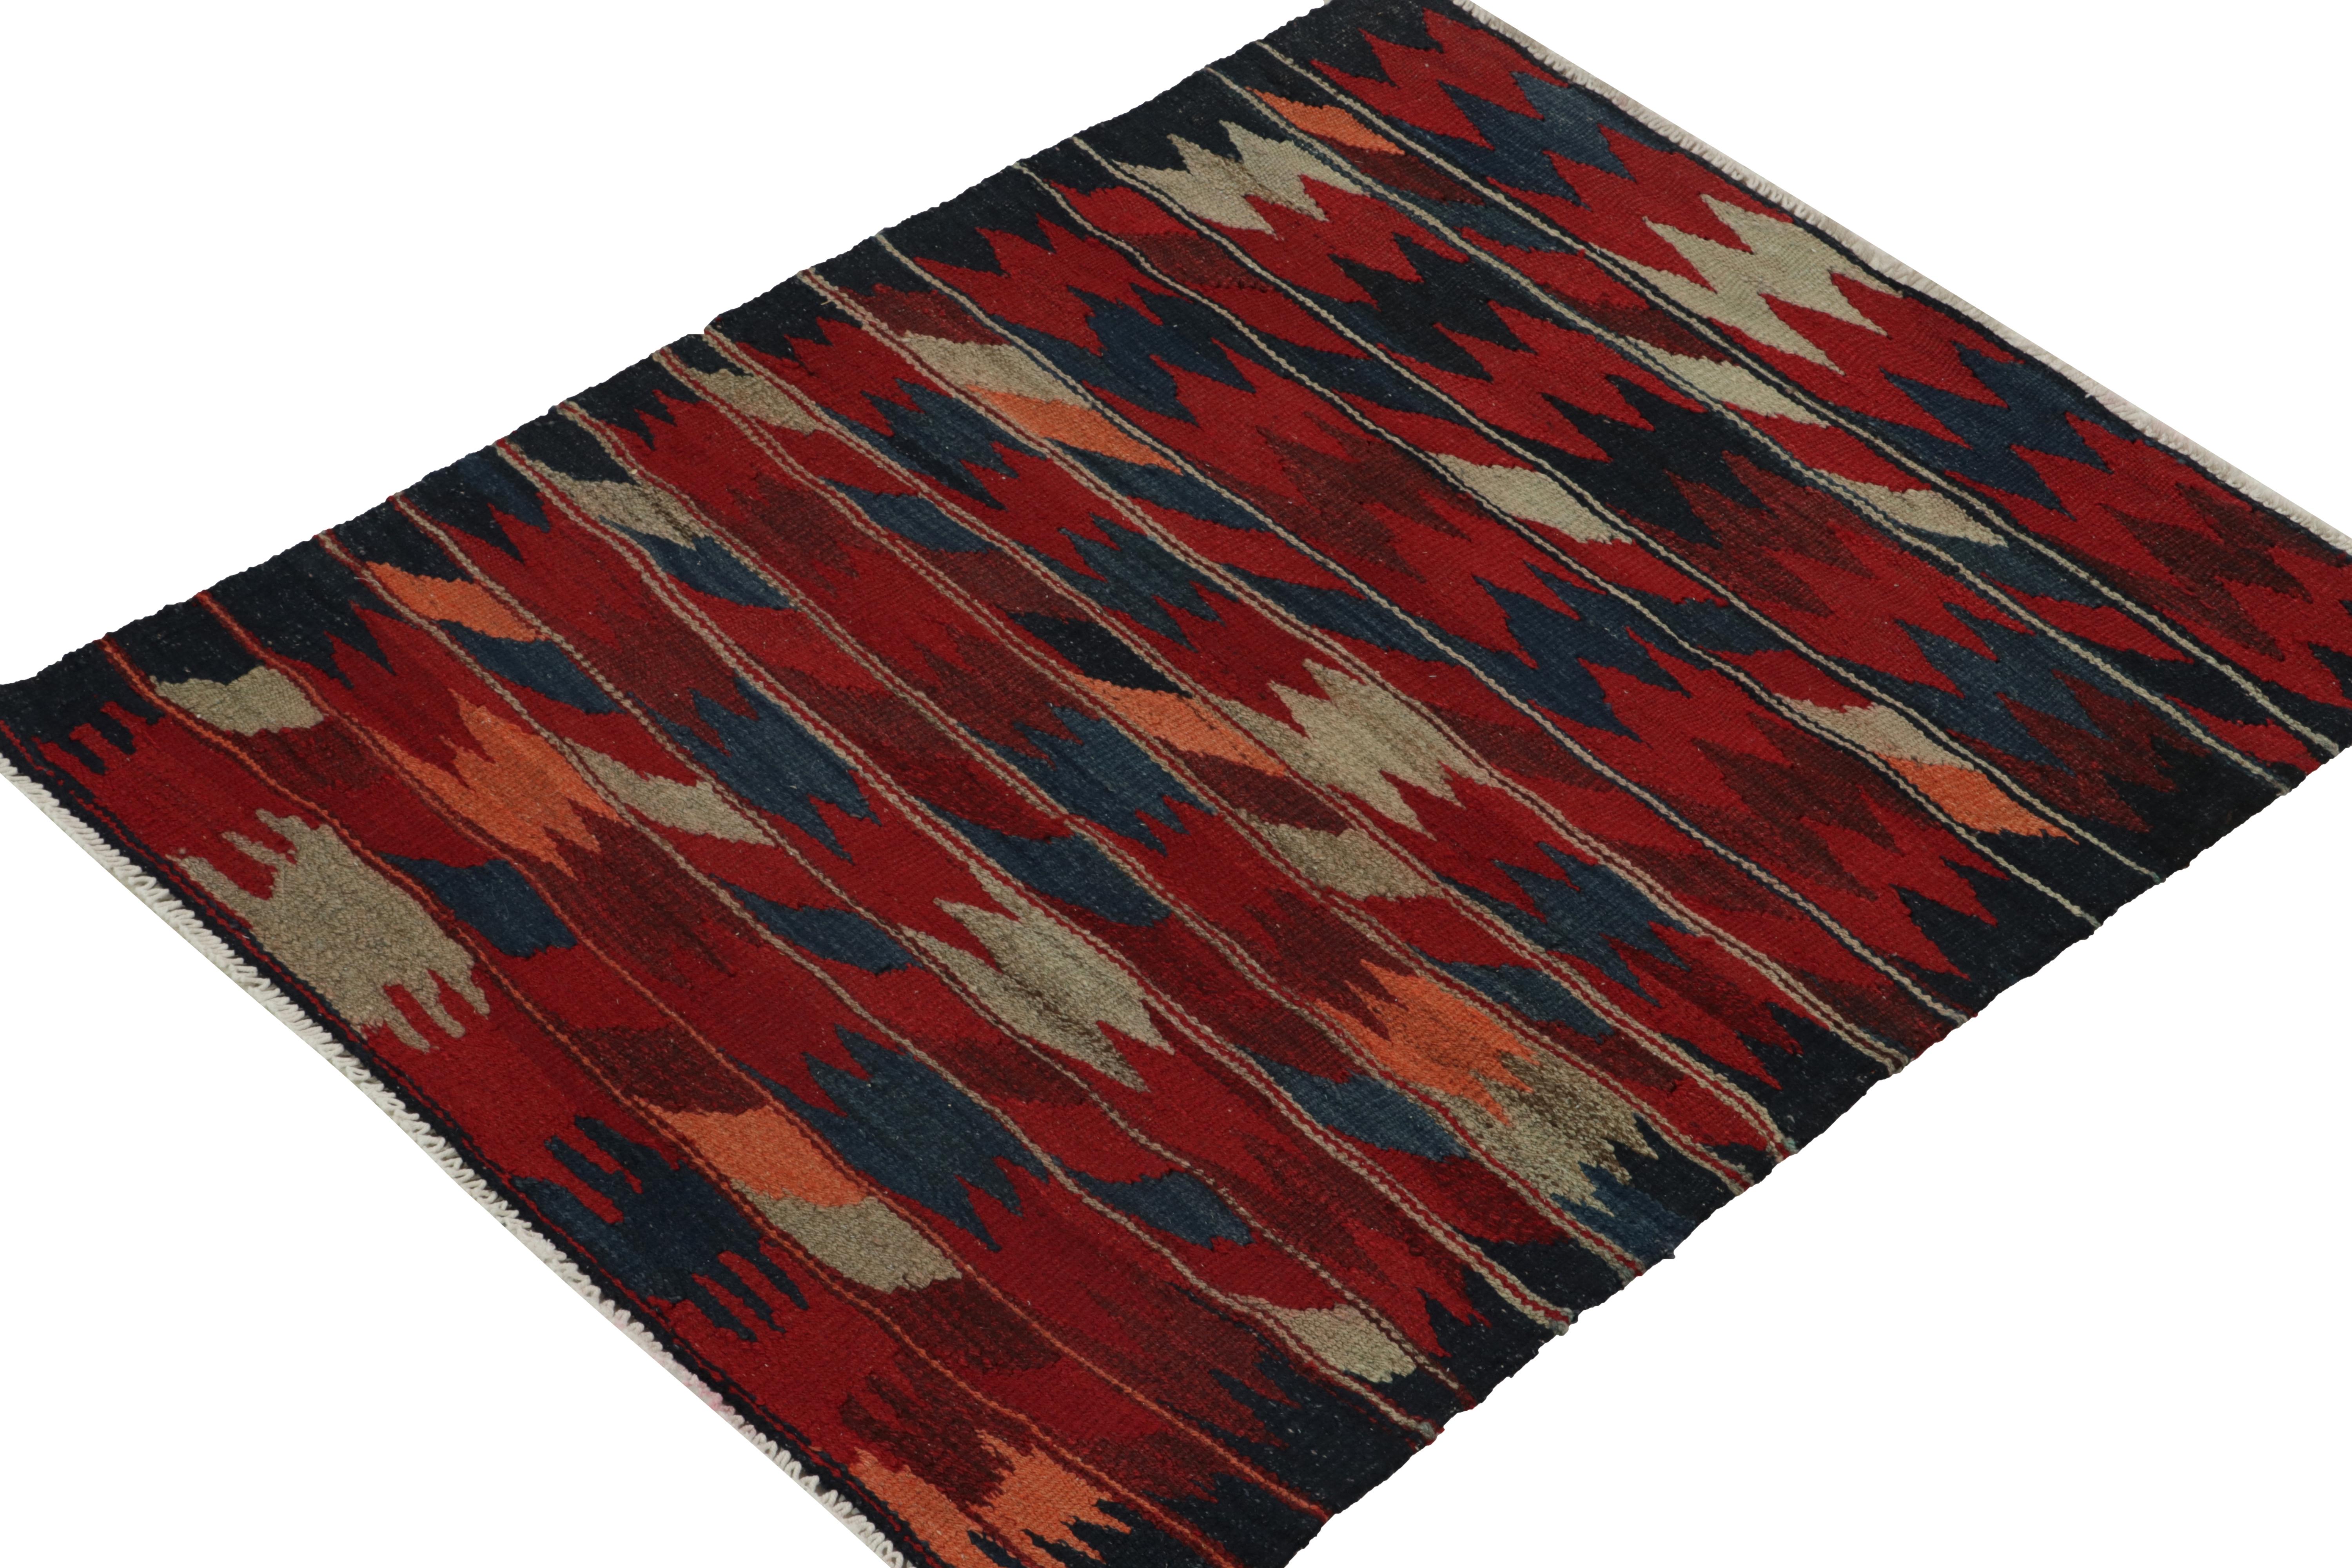 Connoting the celebrated tribal style, this 4x4 kilim rug hails from a special new curation of Persian Sofreh flat weaves. This square flatweave from the utilitous tribal lineage enjoys a geometric pattern alternating in tones of red, grey, peach &